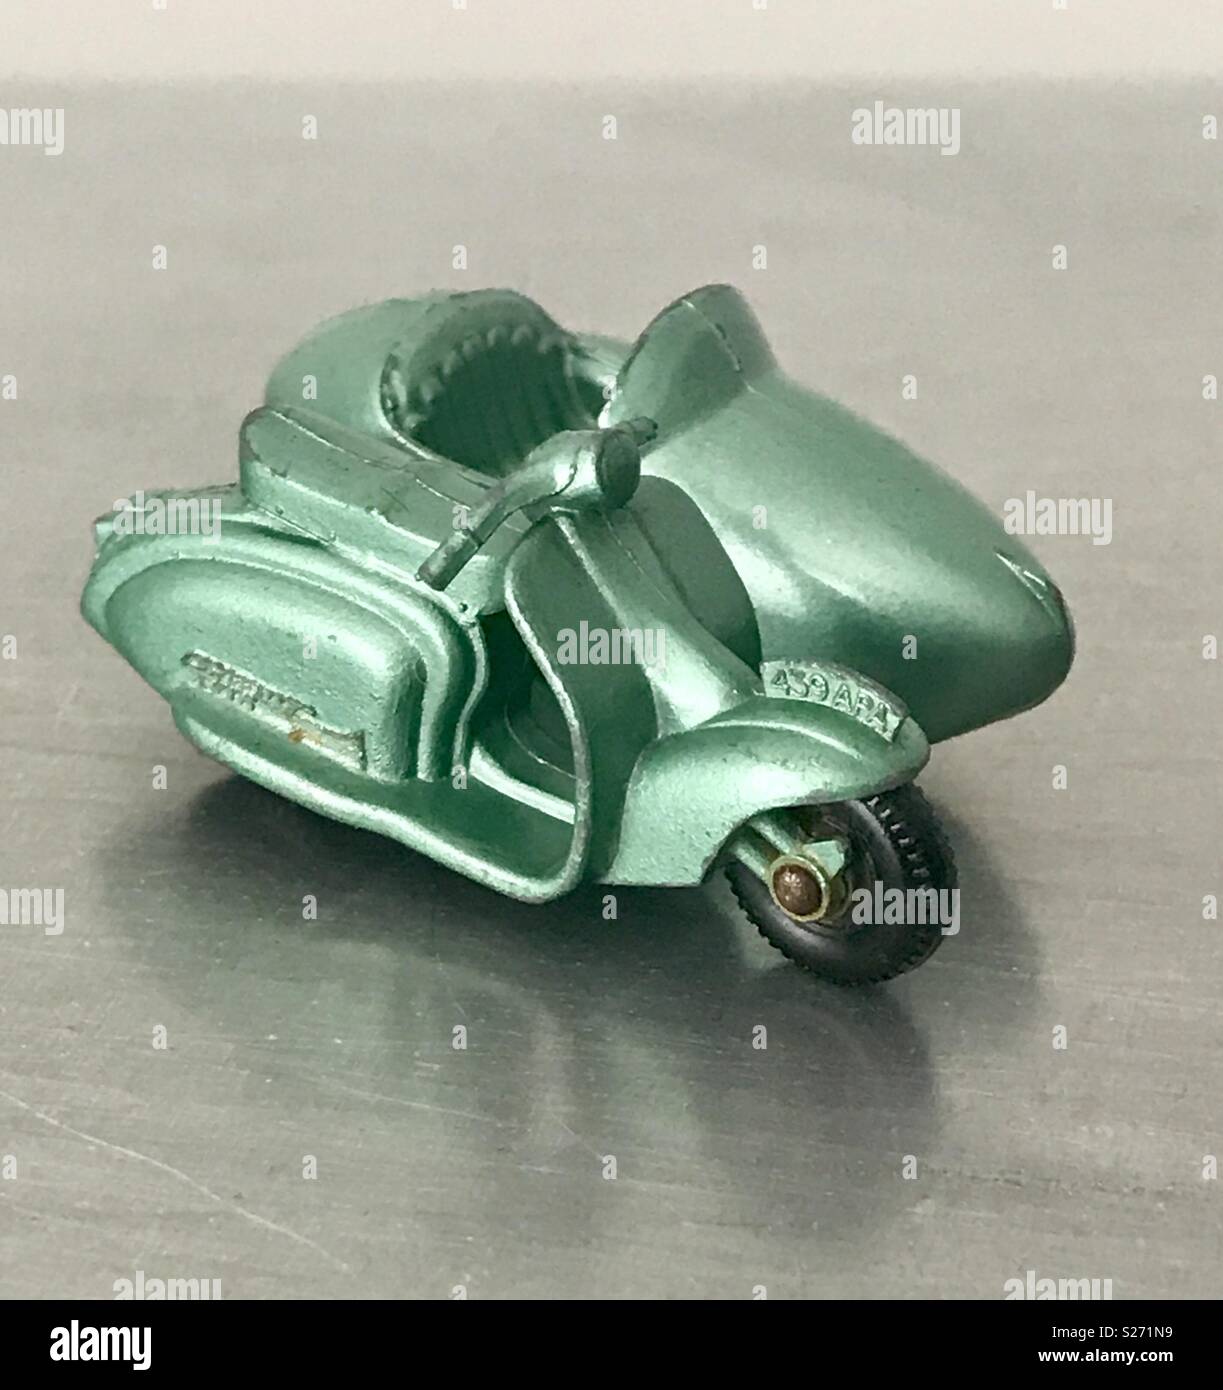 Vintage motorcycle sidecar Combination Toy Stock Photo